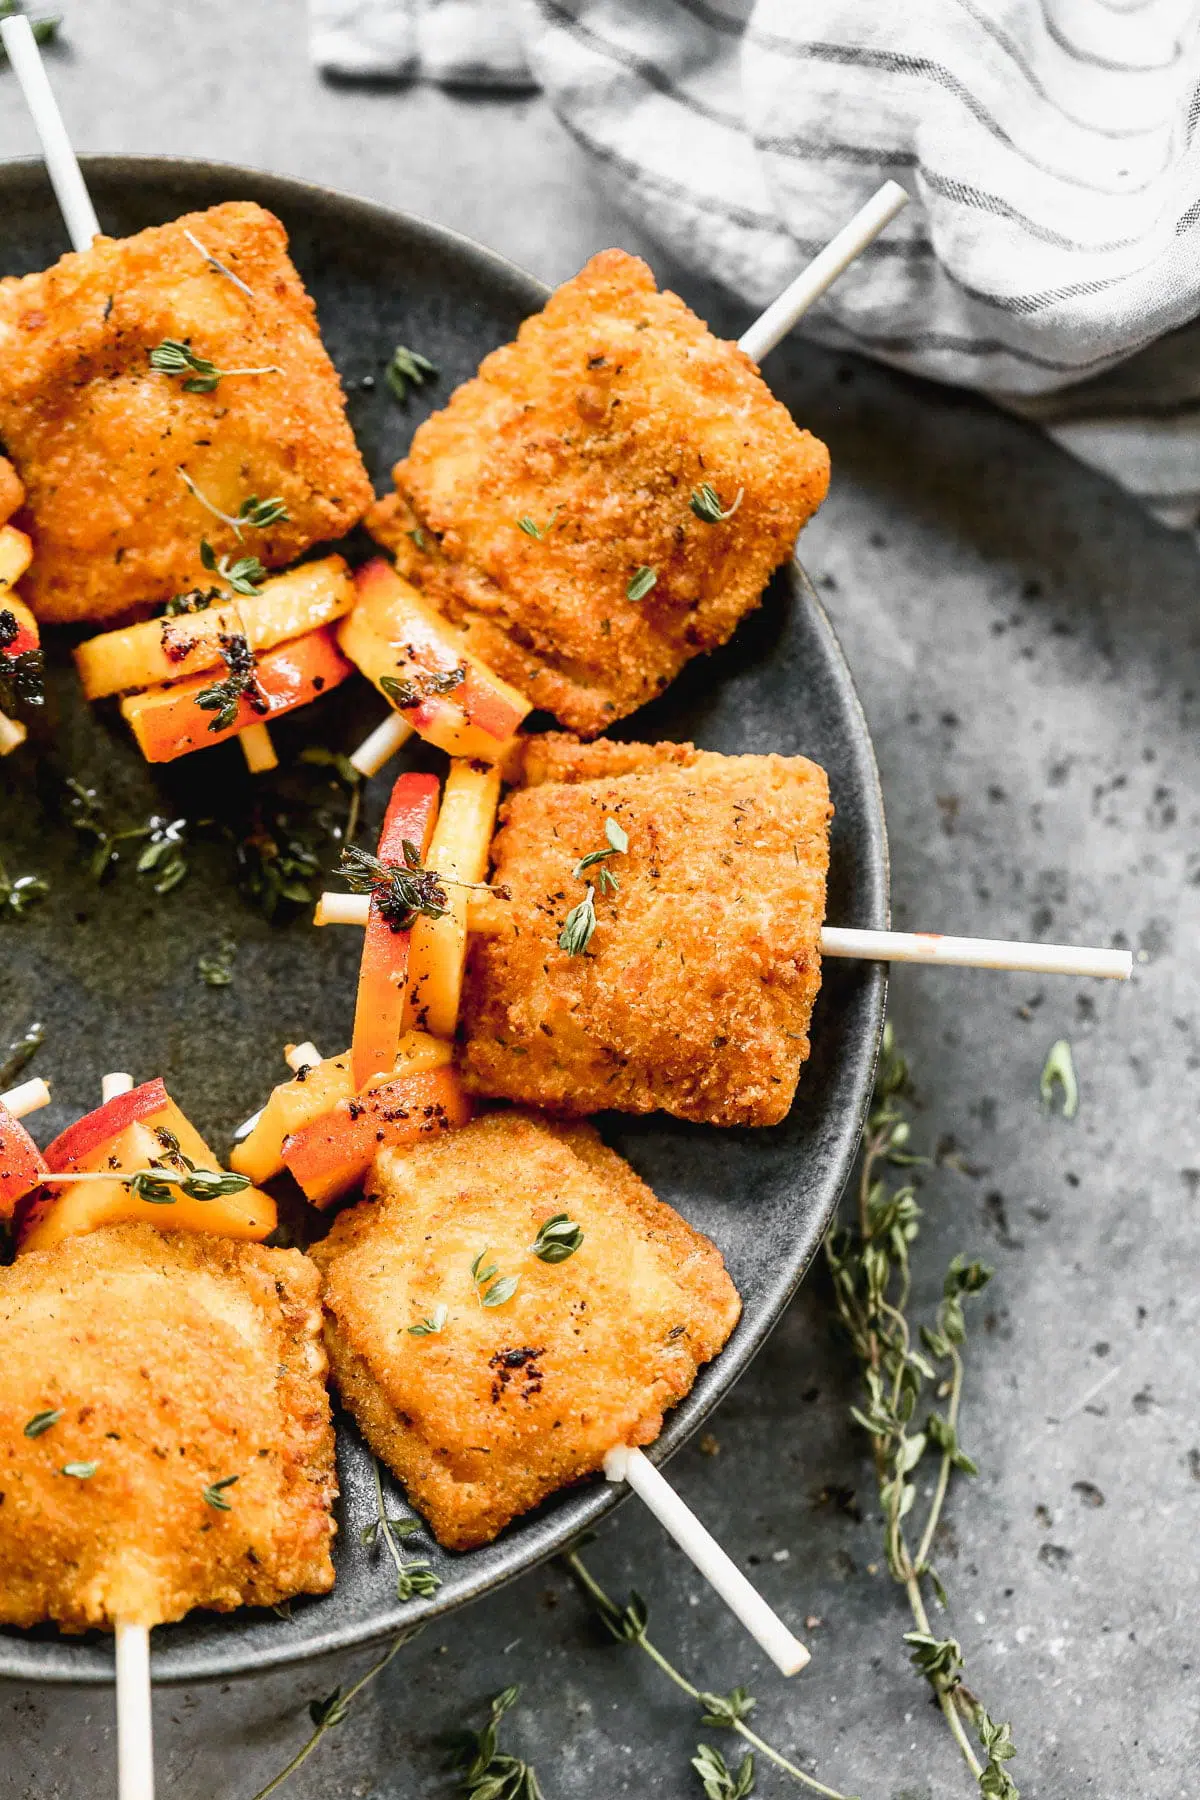 Cocktail hour just got infinitely easier and more delicious with our Peach Toasted Ravioli Pops. We throw crispy ravioli on a cocktail stick with the ripest summer peaches, drizzle each one with brown butter and thyme infused honey and serve it up with our favoirte chilled rose.